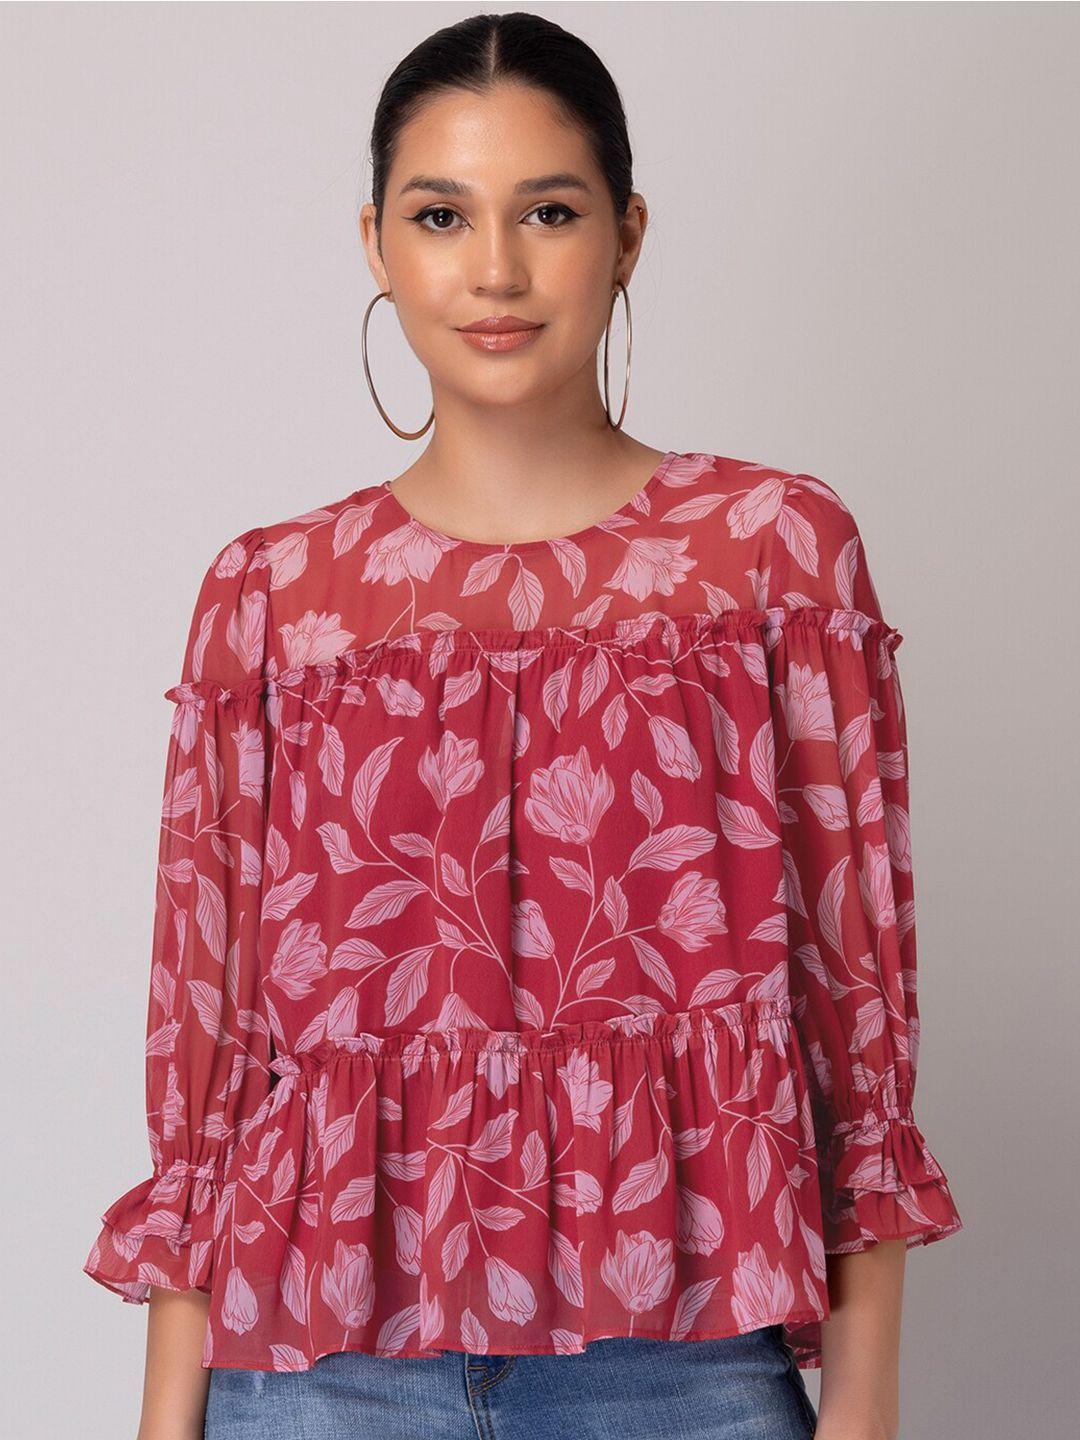 faballey red floral printed cuff sleeve georgette blouson top